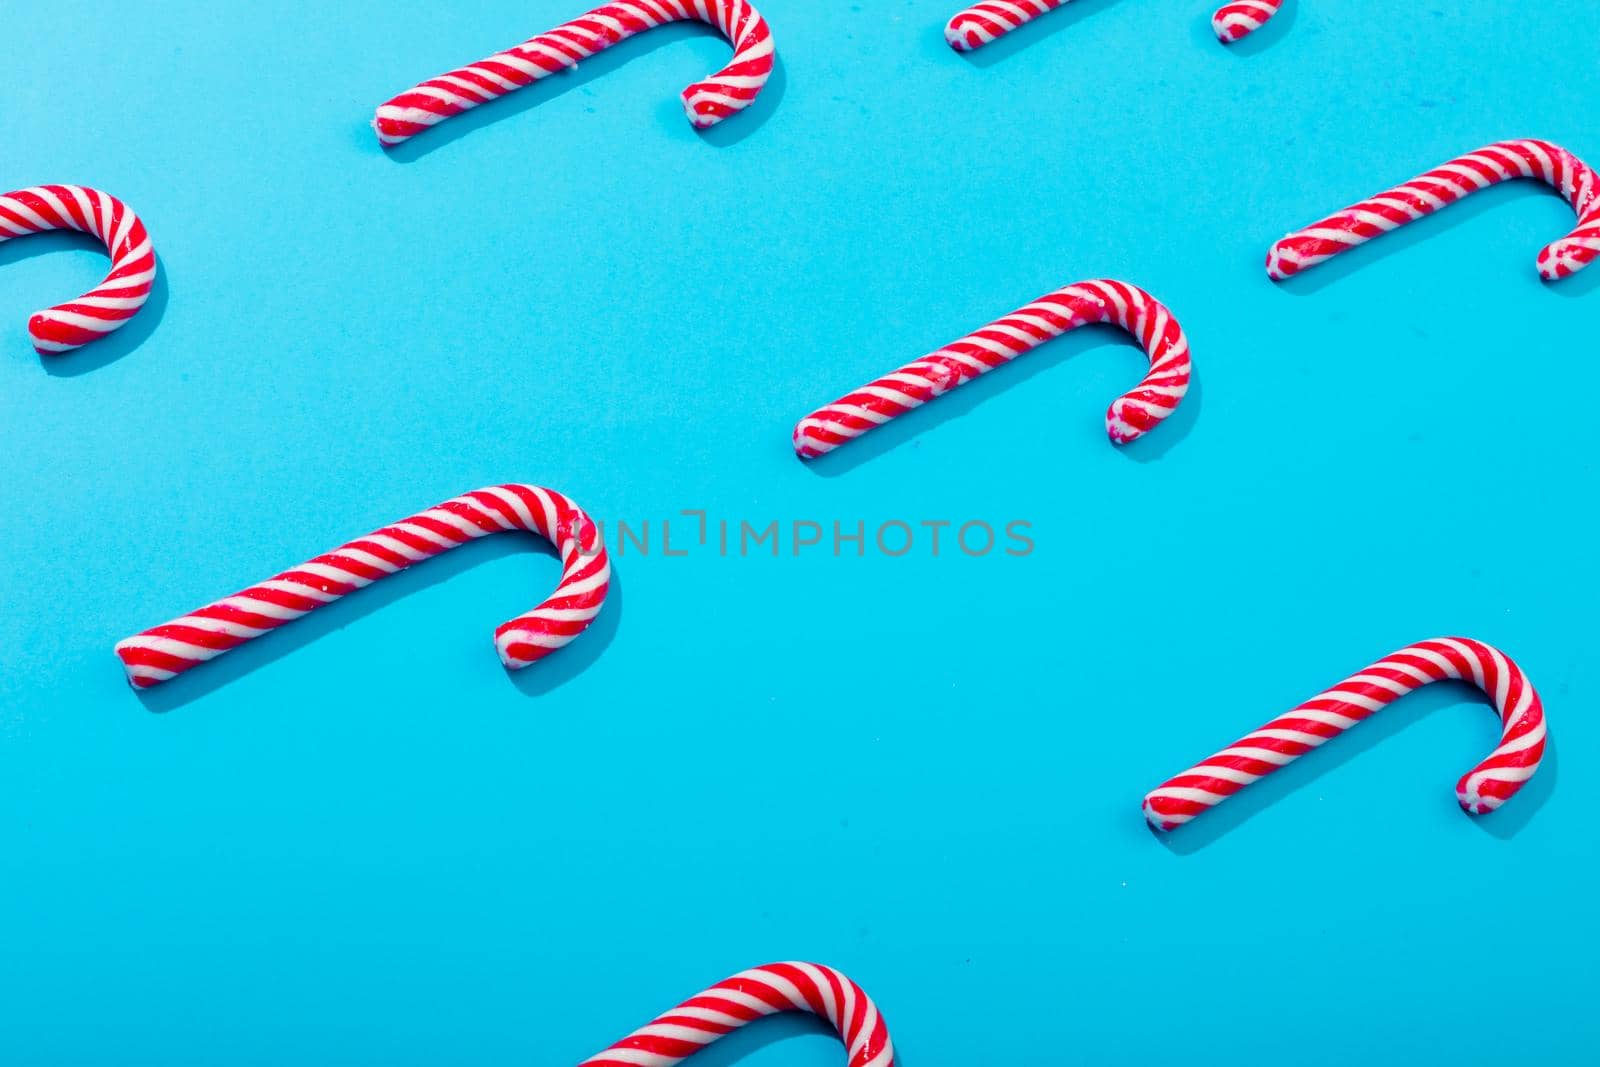 Composition of rows of multiple candy canes on blue background. christmas, tradition and celebration concept.